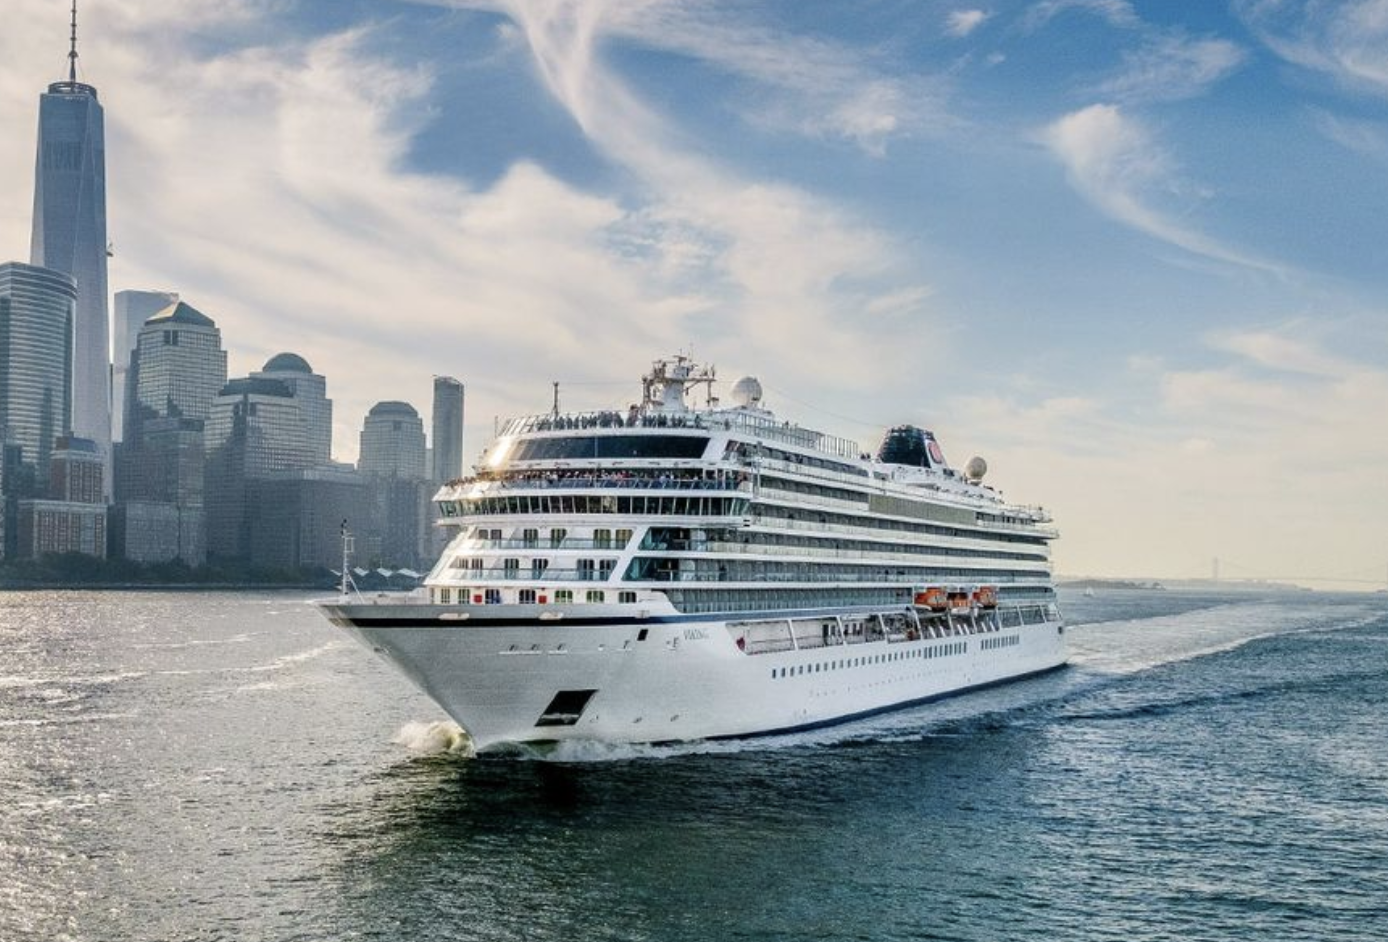 Viking takes delivery of the latest ship with brand new itineraries